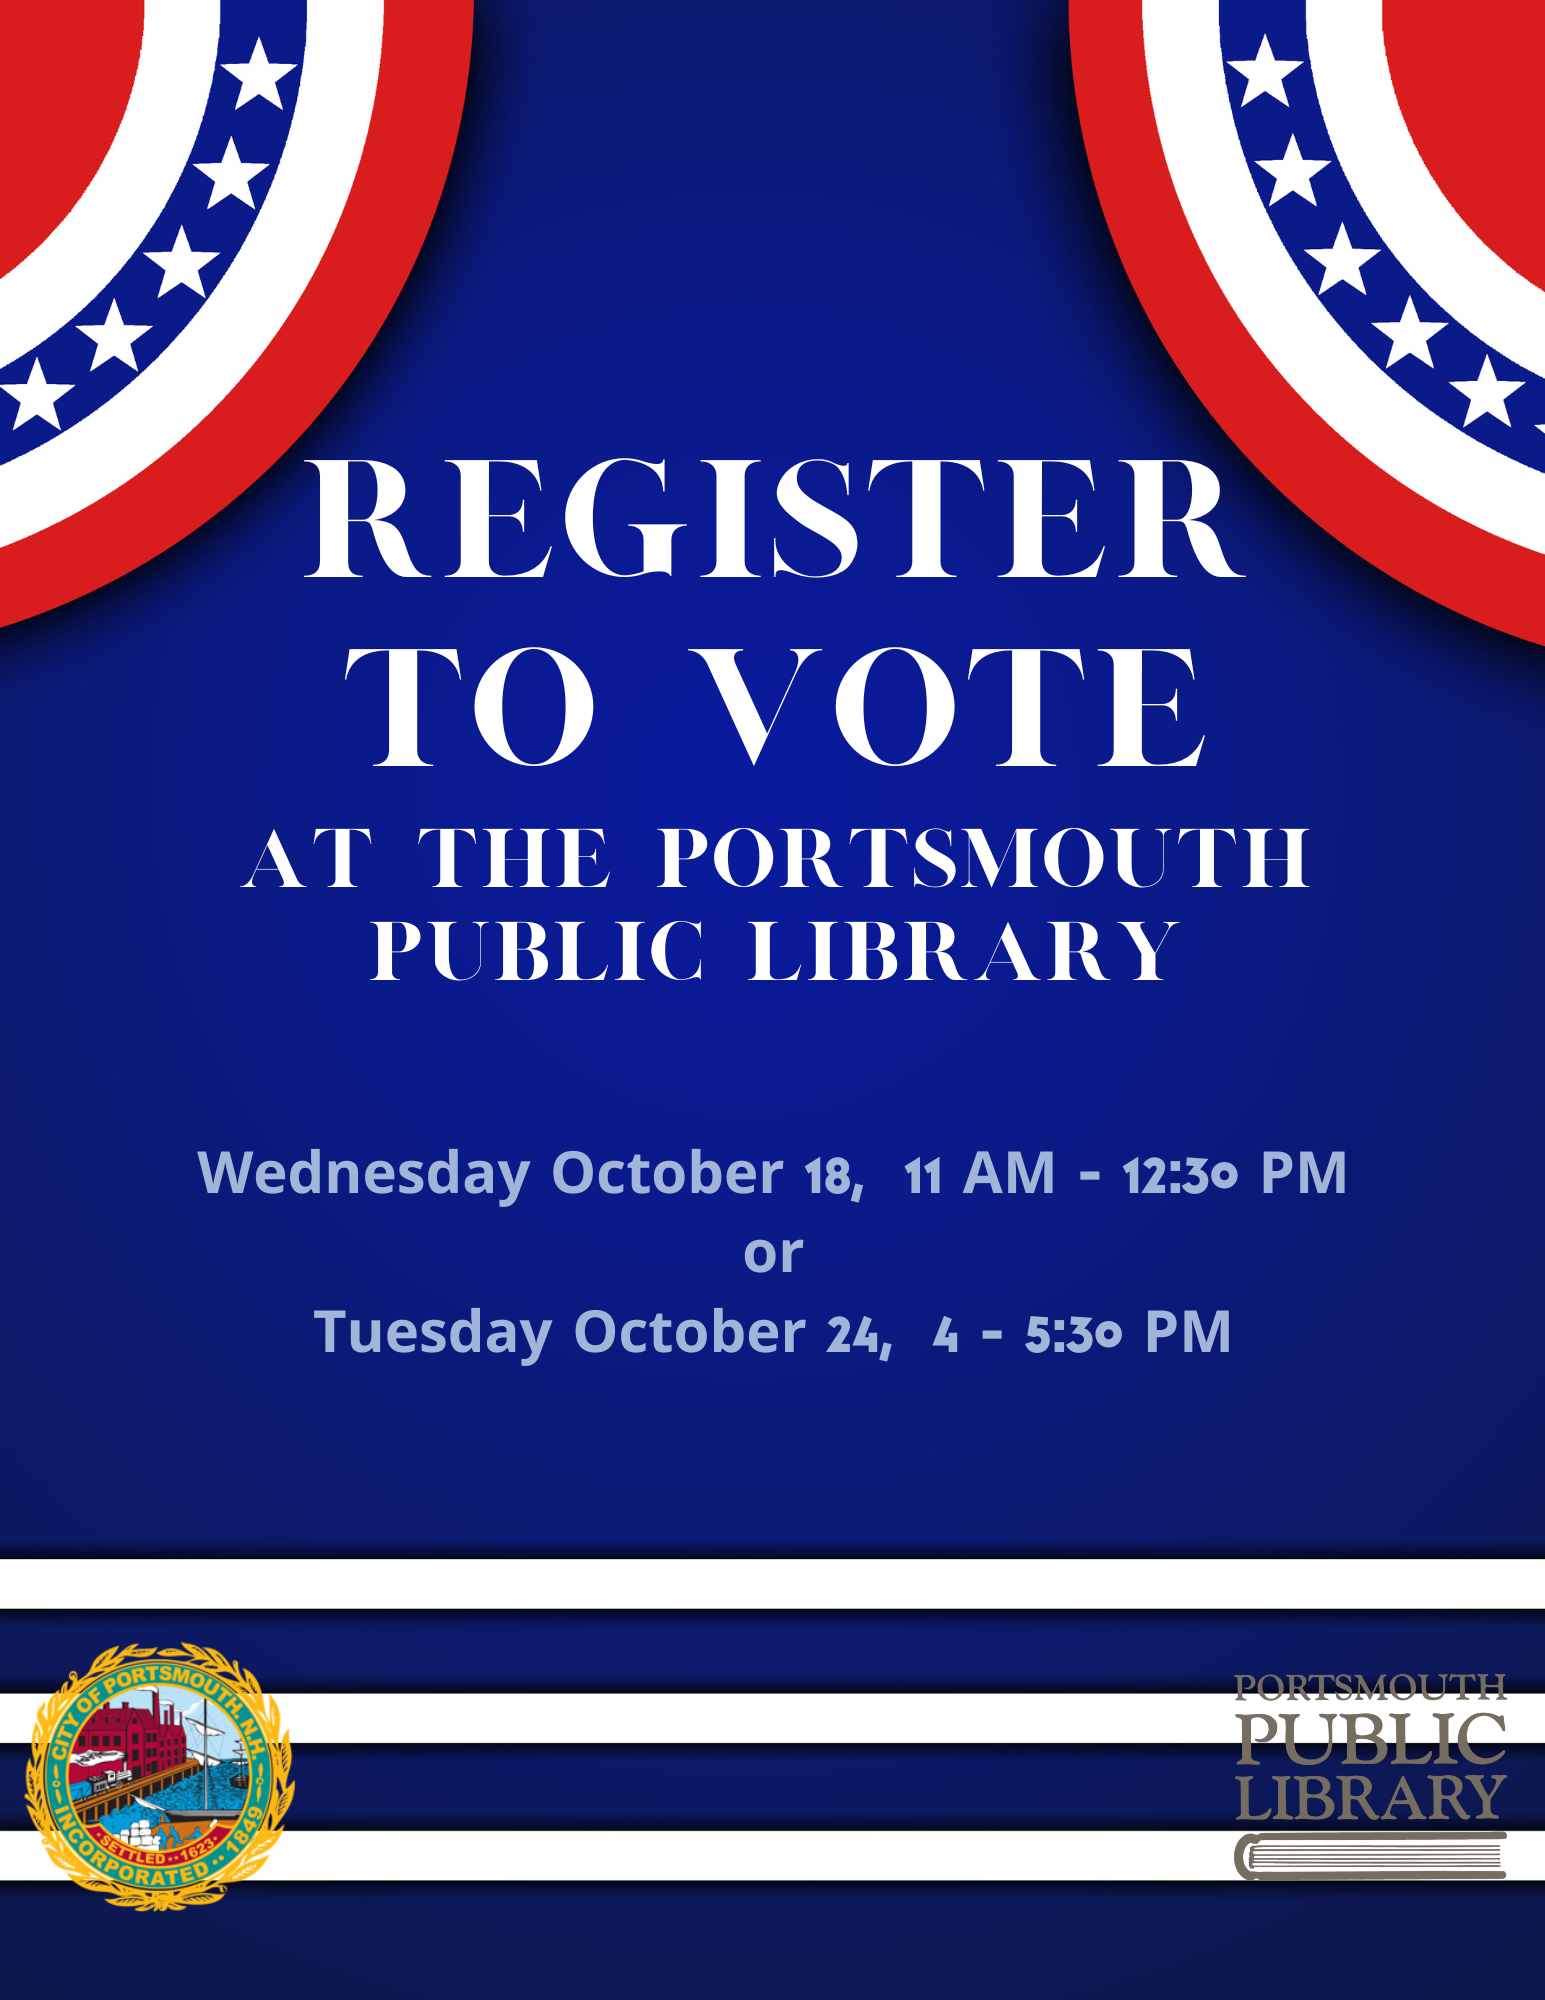 Register to vote at the Porstmouth Public Library Wednesday October 4 11-12:30 or Tuesday October 24 from 4-5:30 PM 175 Parrott Ave. Bring Photo ID, Birth Certificate, U.S. Passport, or U.S. Military ID and Proof of residency